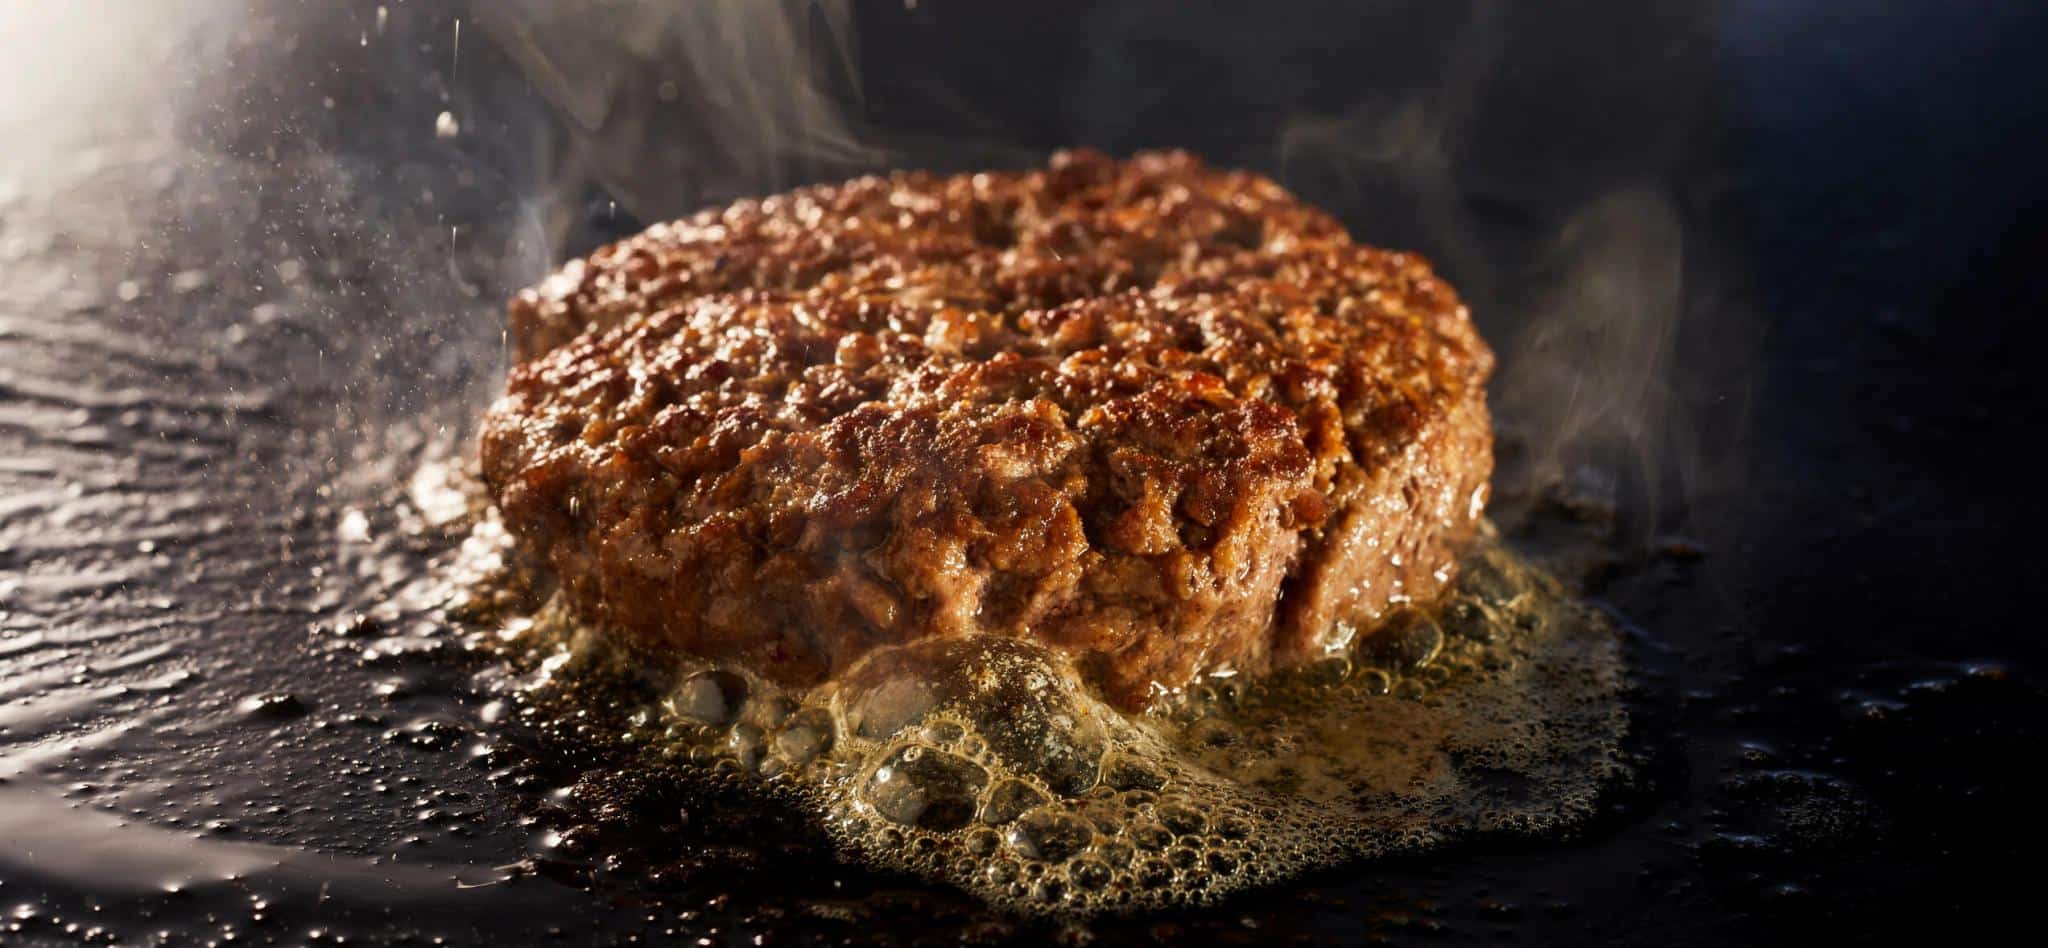 How to Clean a Blackstone Griddle Tidyhere  Image of a Thick Juicy Minced Beef Patty for a Traditional Burger Grilling on a Griddle